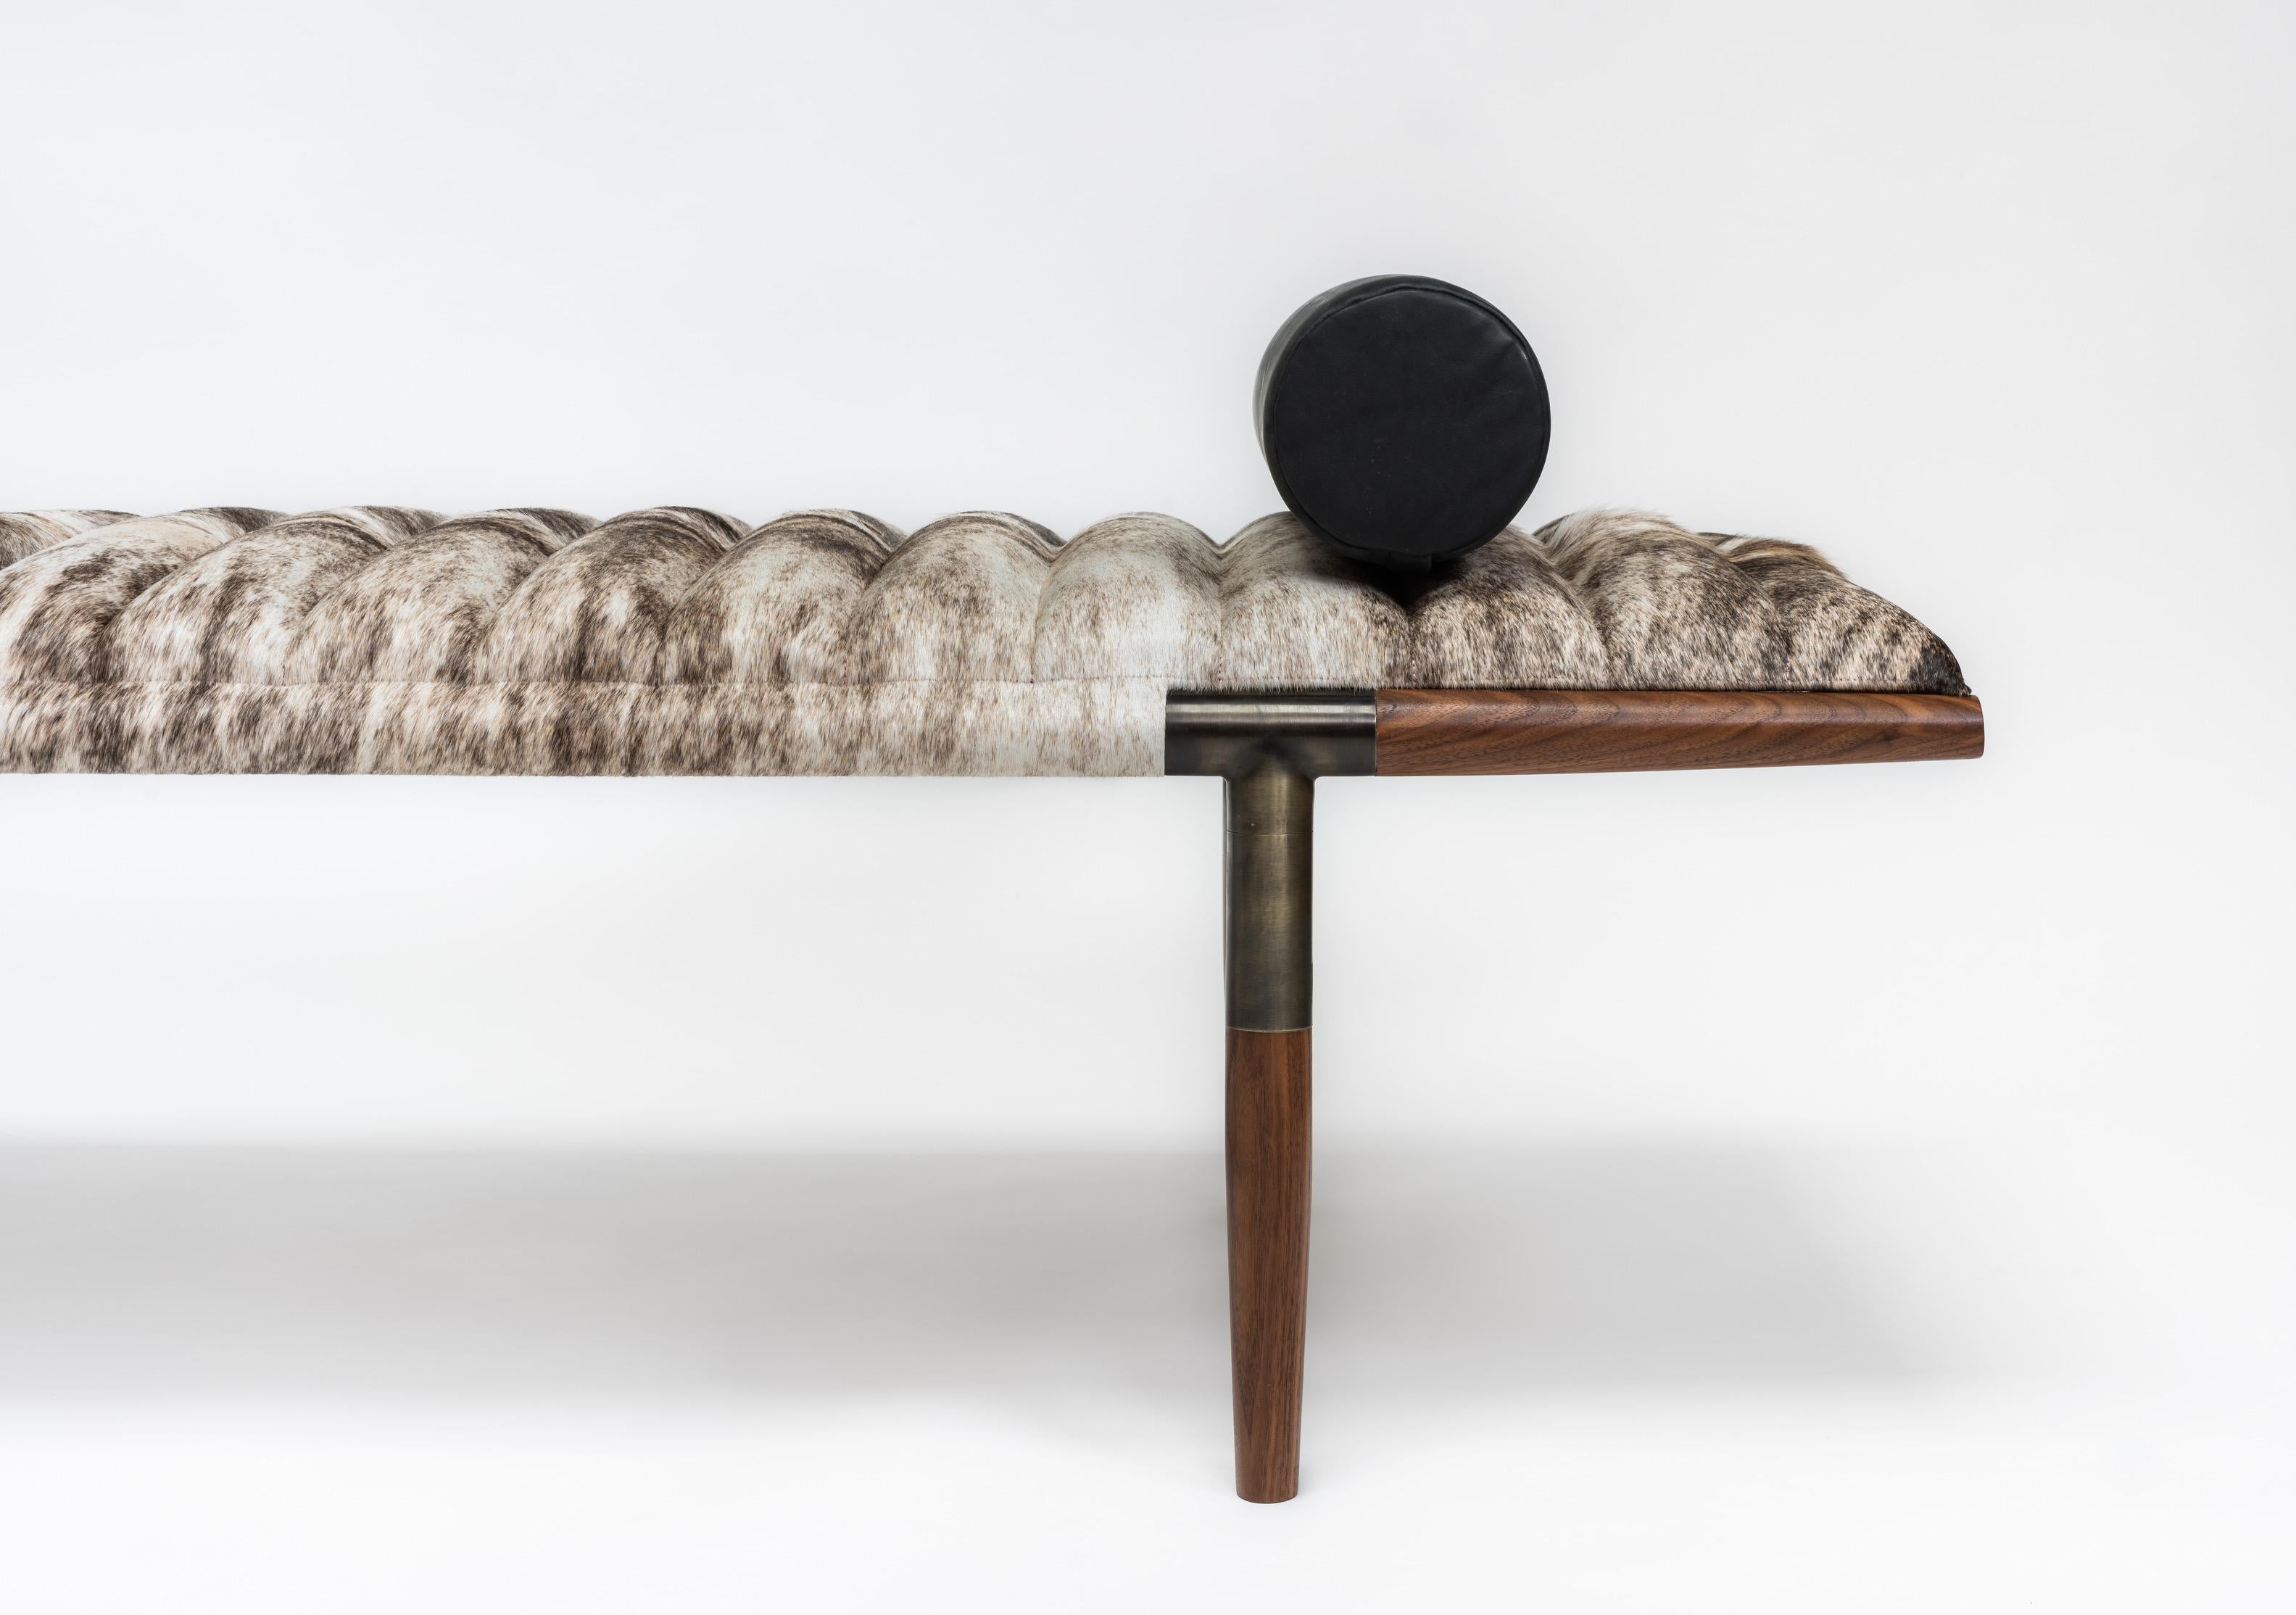 The EÆ daybed in ribbed grey Brazilian brindle hair-on-hide cushion with asymmetrically tapered oval black walnut legs and blackened brass frame.
Matching or custom contrasting bolster included.
This iconic design can be customized with different